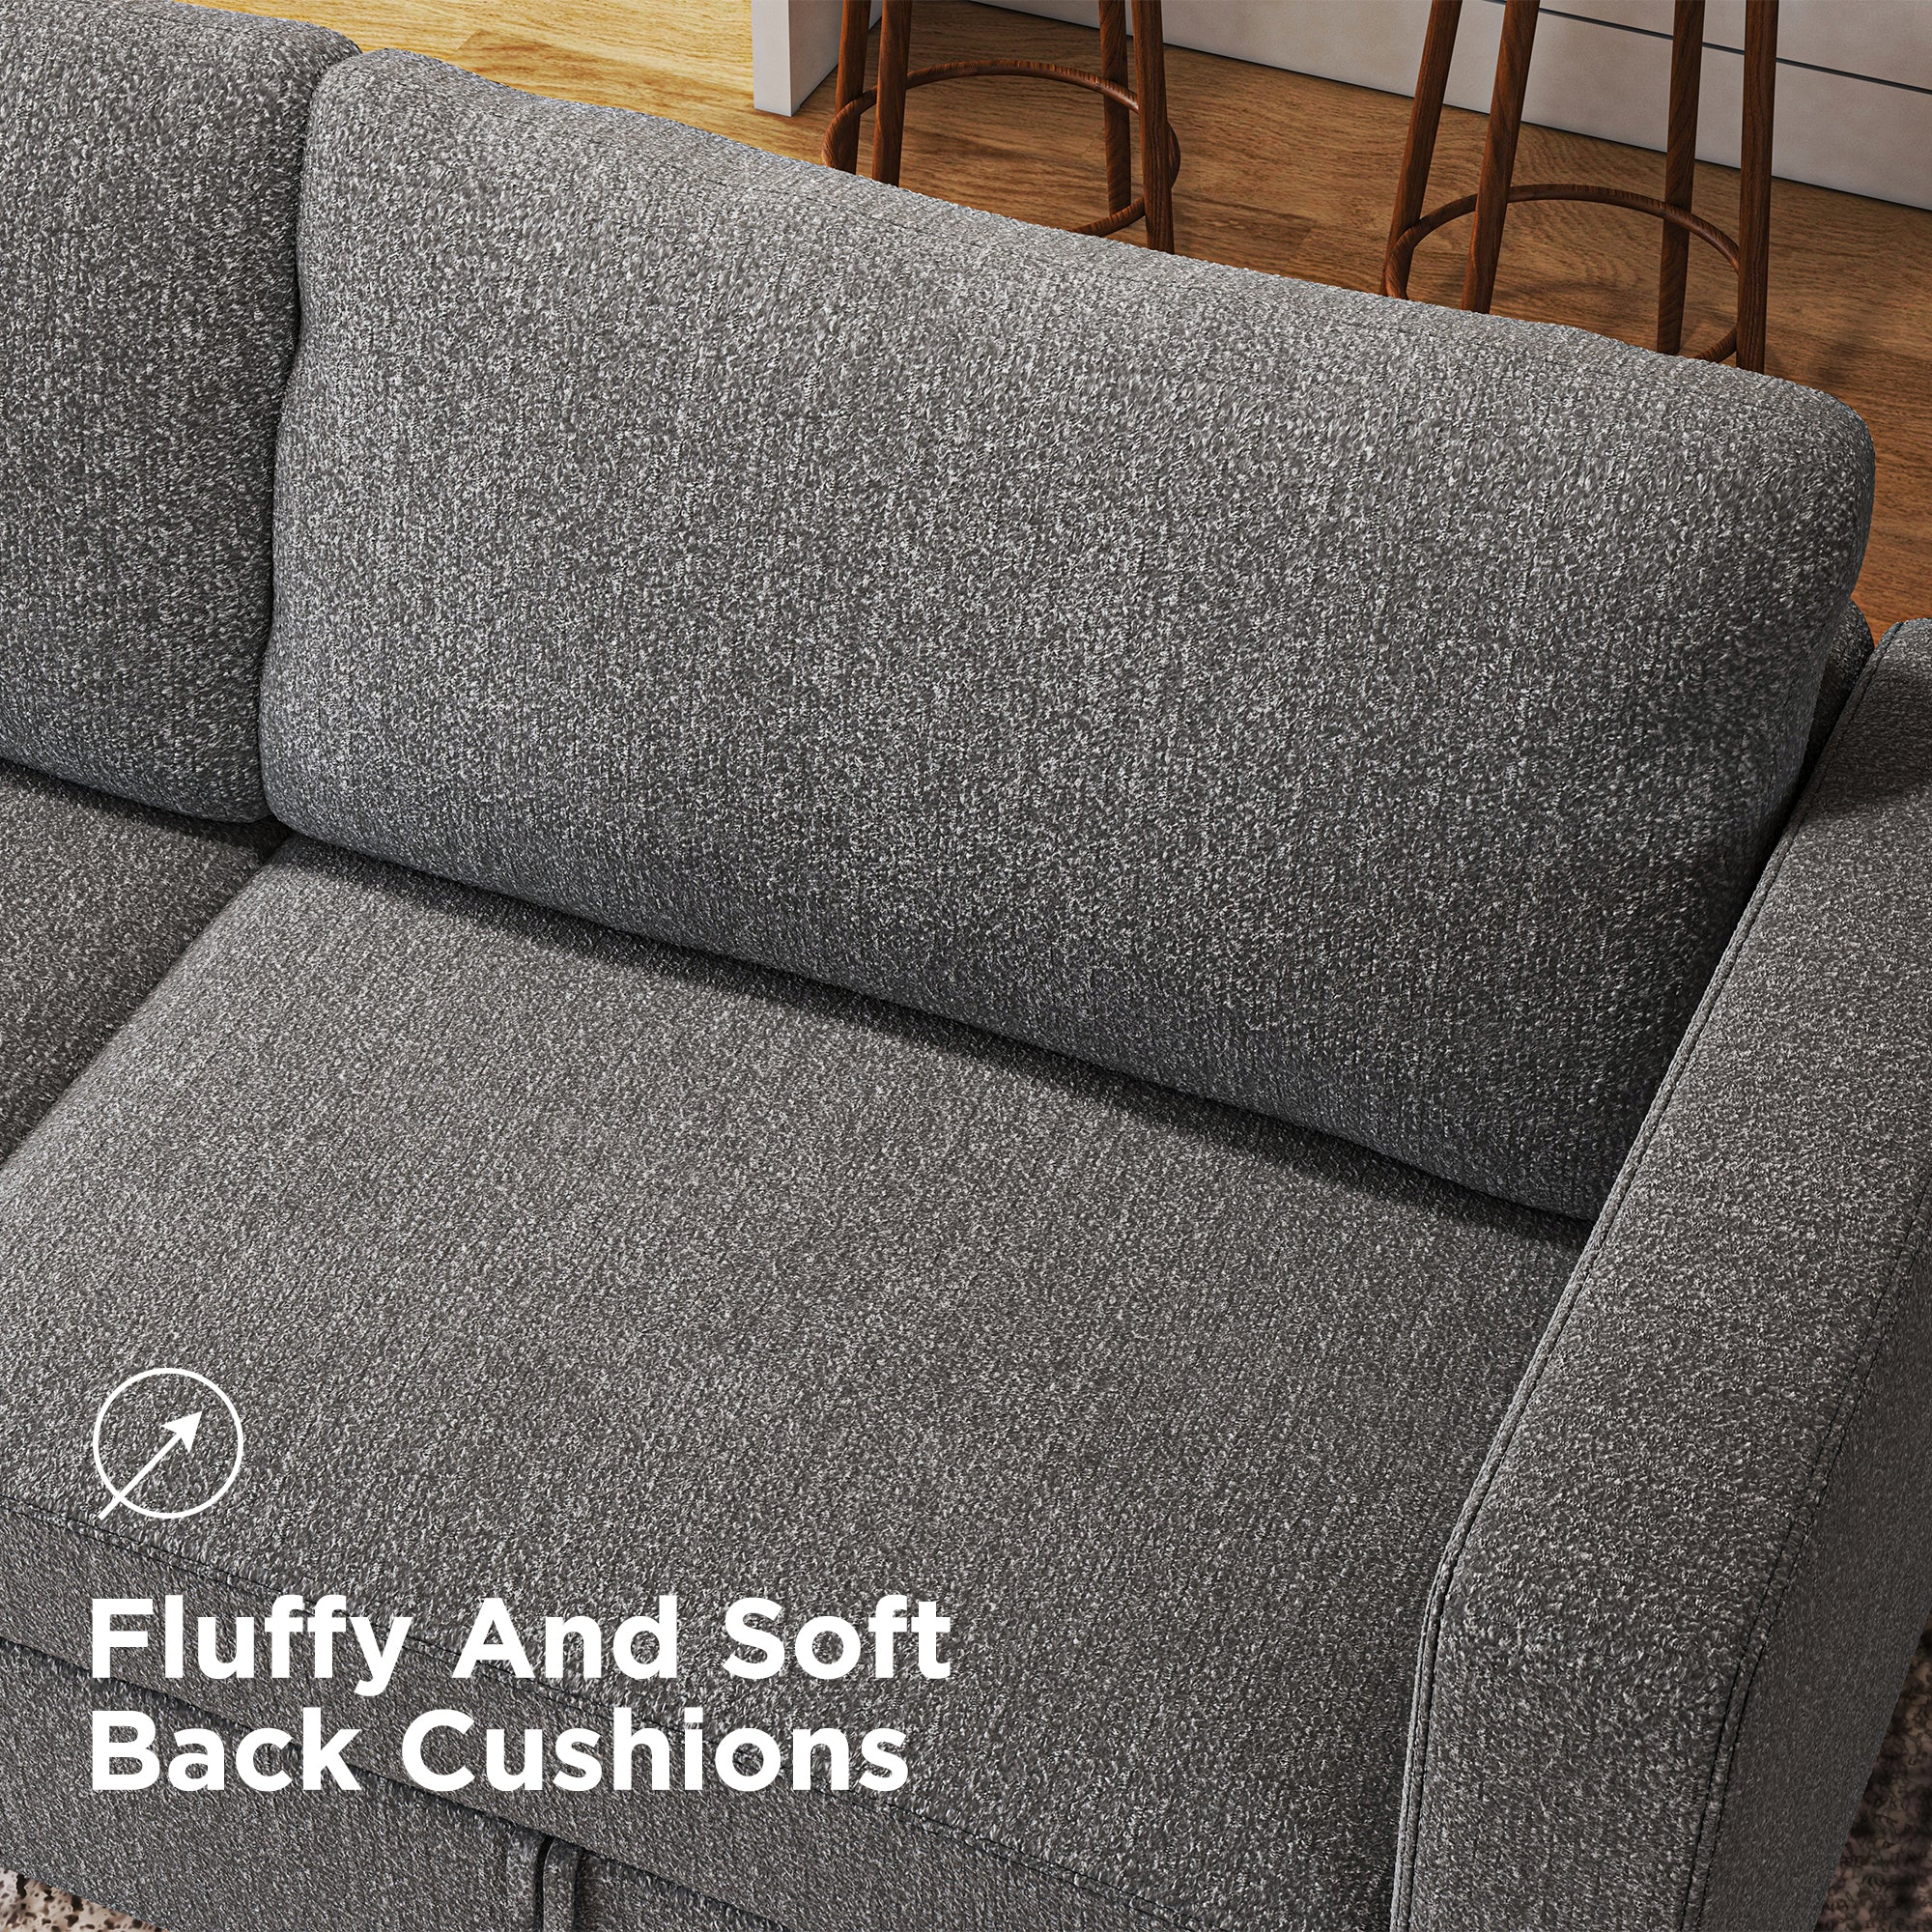 Soft and Fluffy Back Cushions of HONBAY Polyester Luxury Modular Sofa Couch